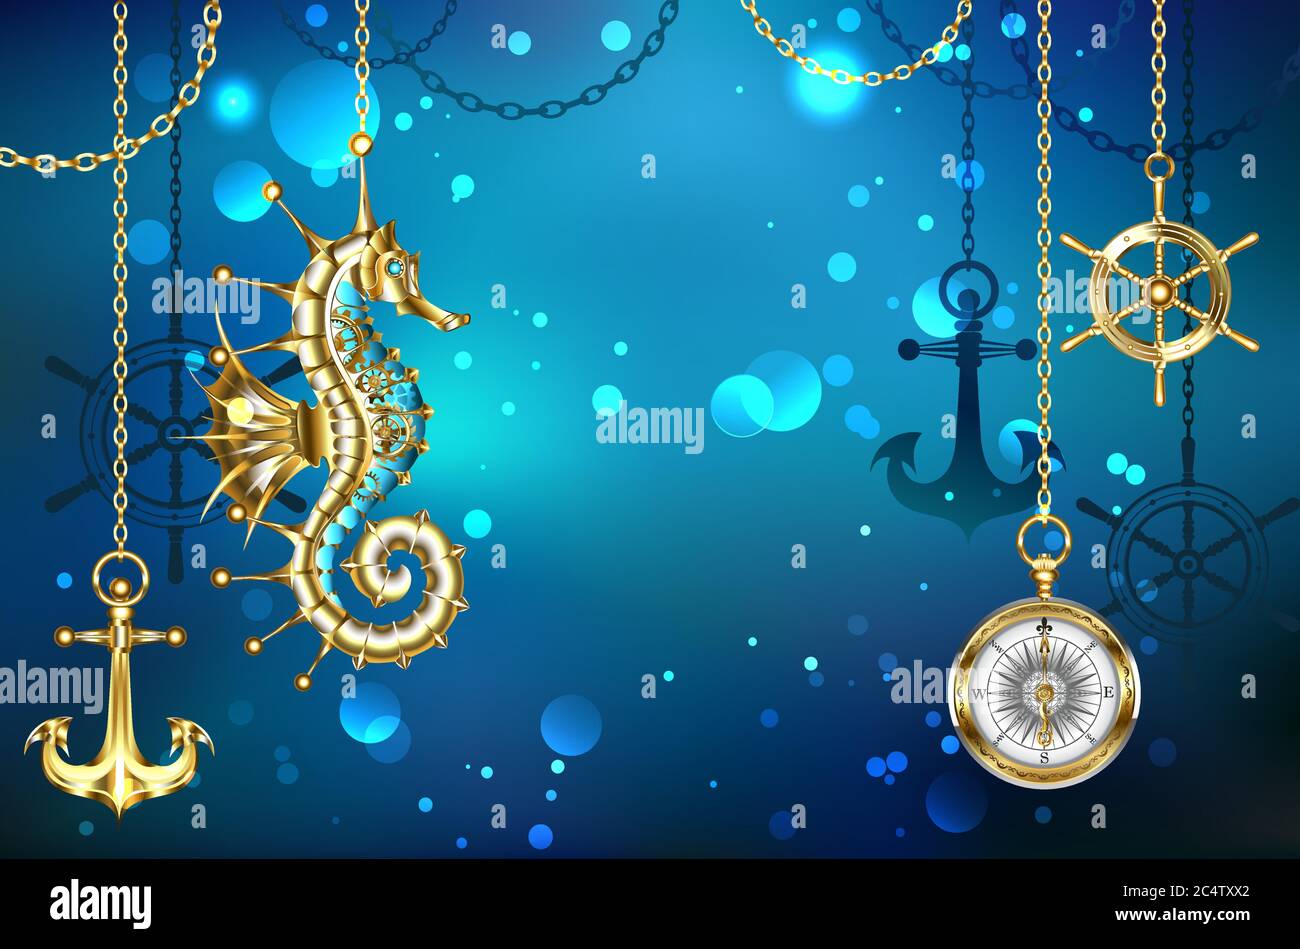 Jewelry, antique, mechanical seahorse on marine, underwater background with gold anchor and helm hanging on metal chains. Stock Vector